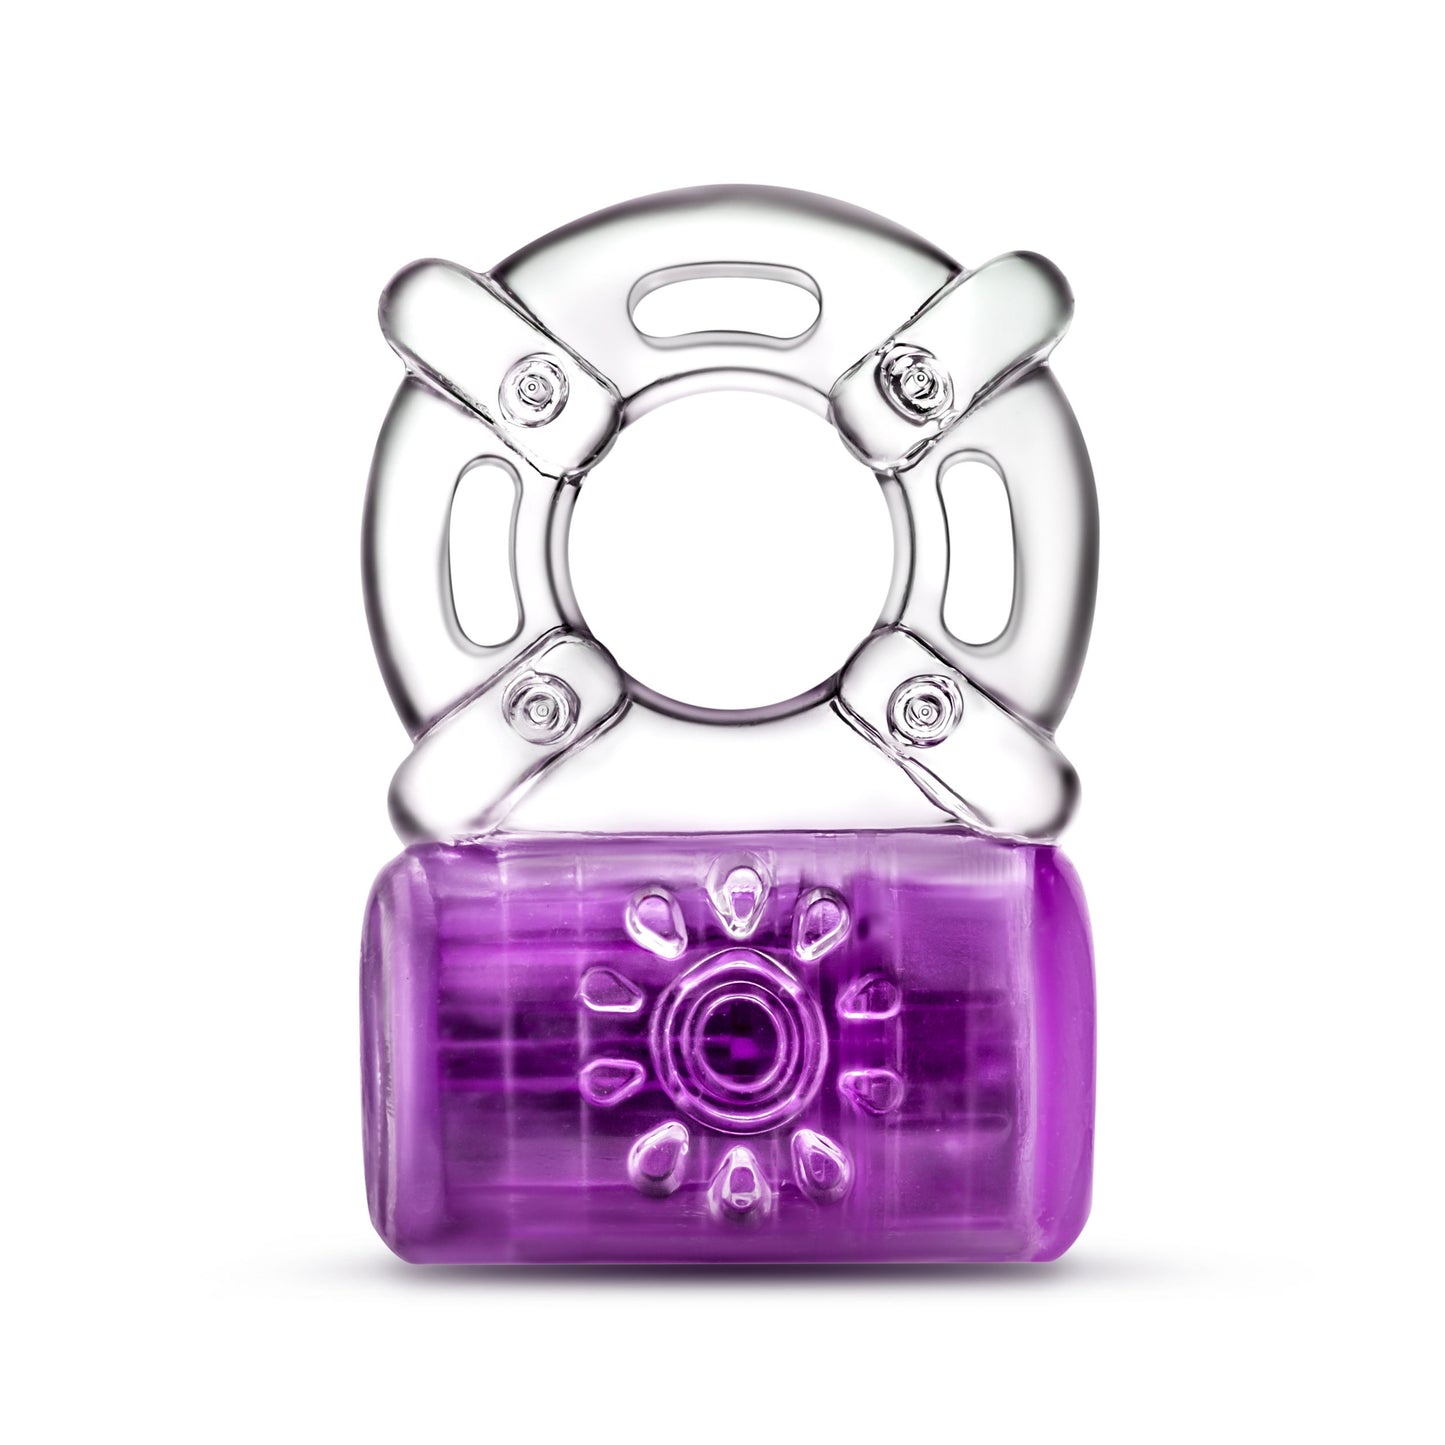 Play With Me - One Night Stand Vibrating C-Ring -  Purple